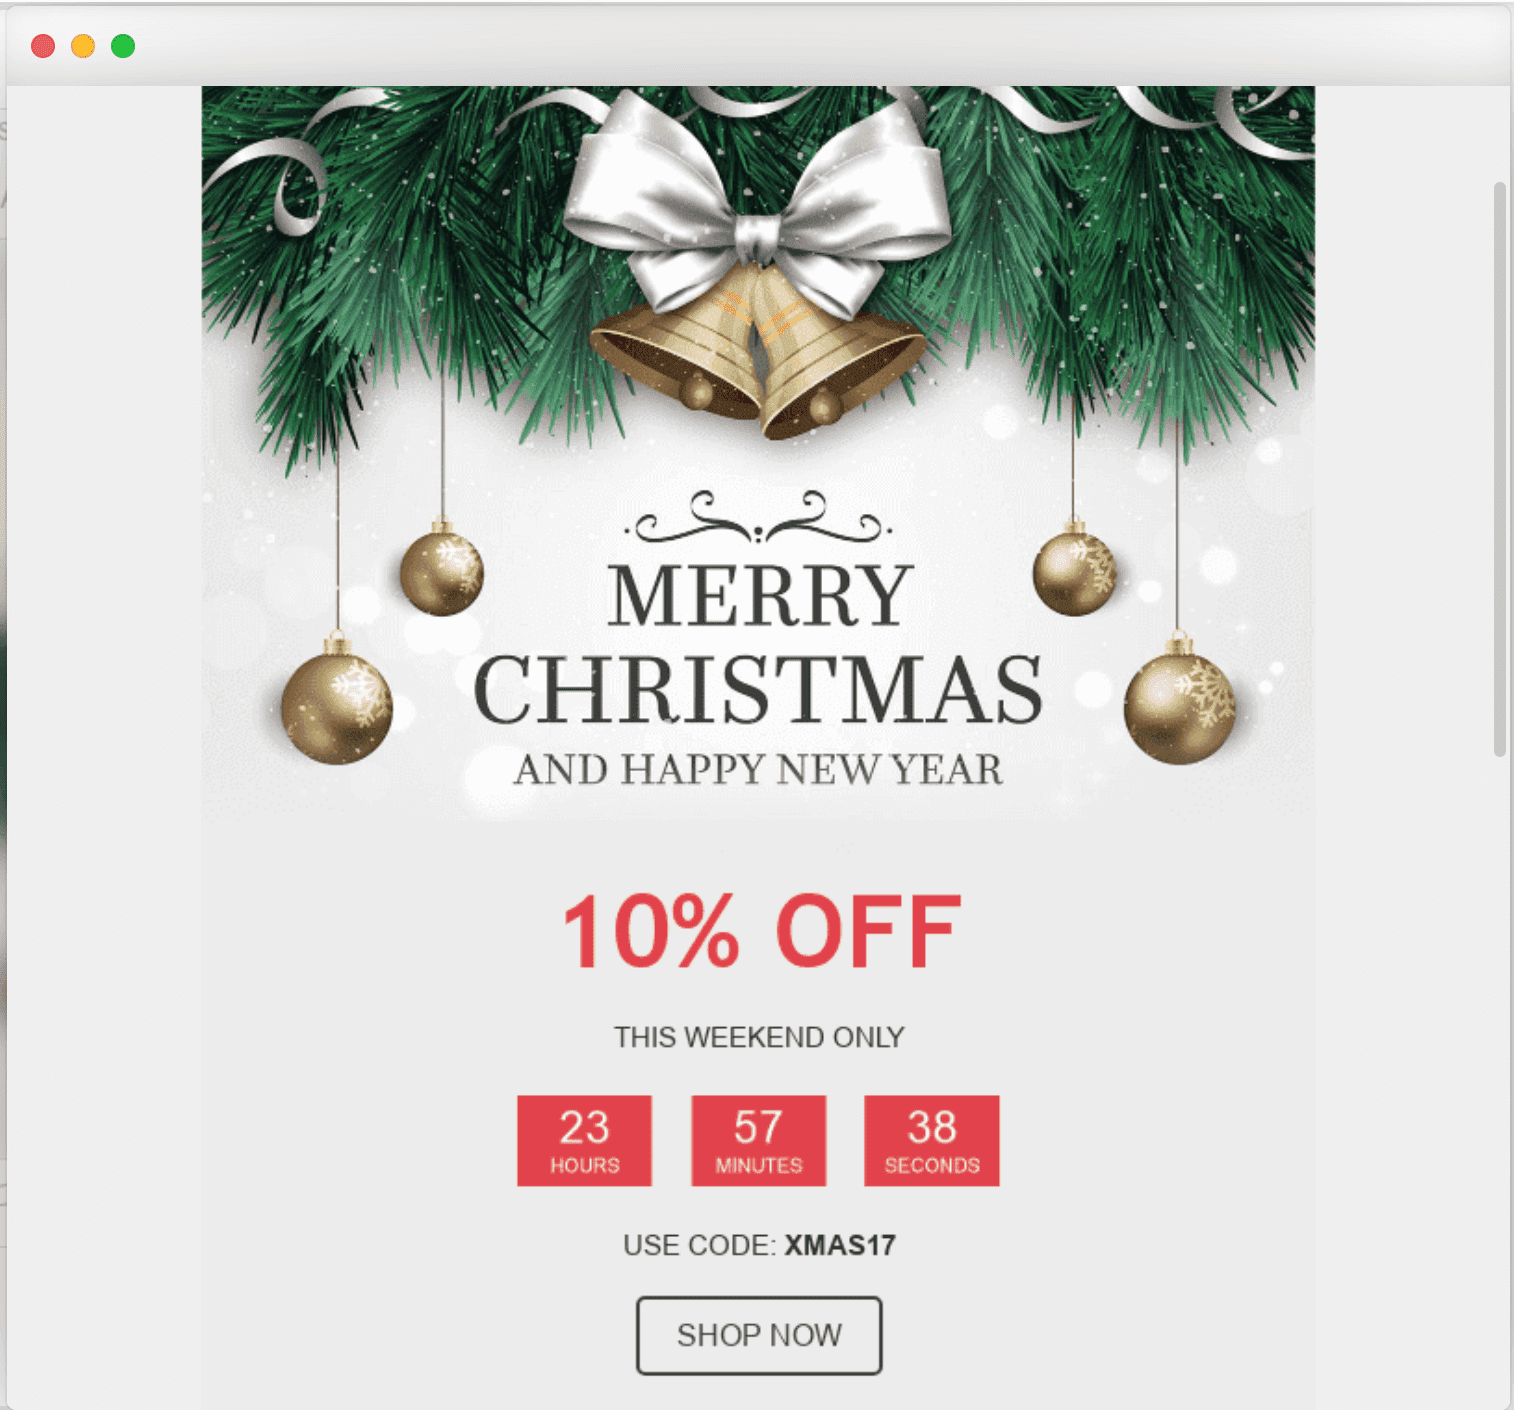 Christmas Email Template with a Countdown Timer